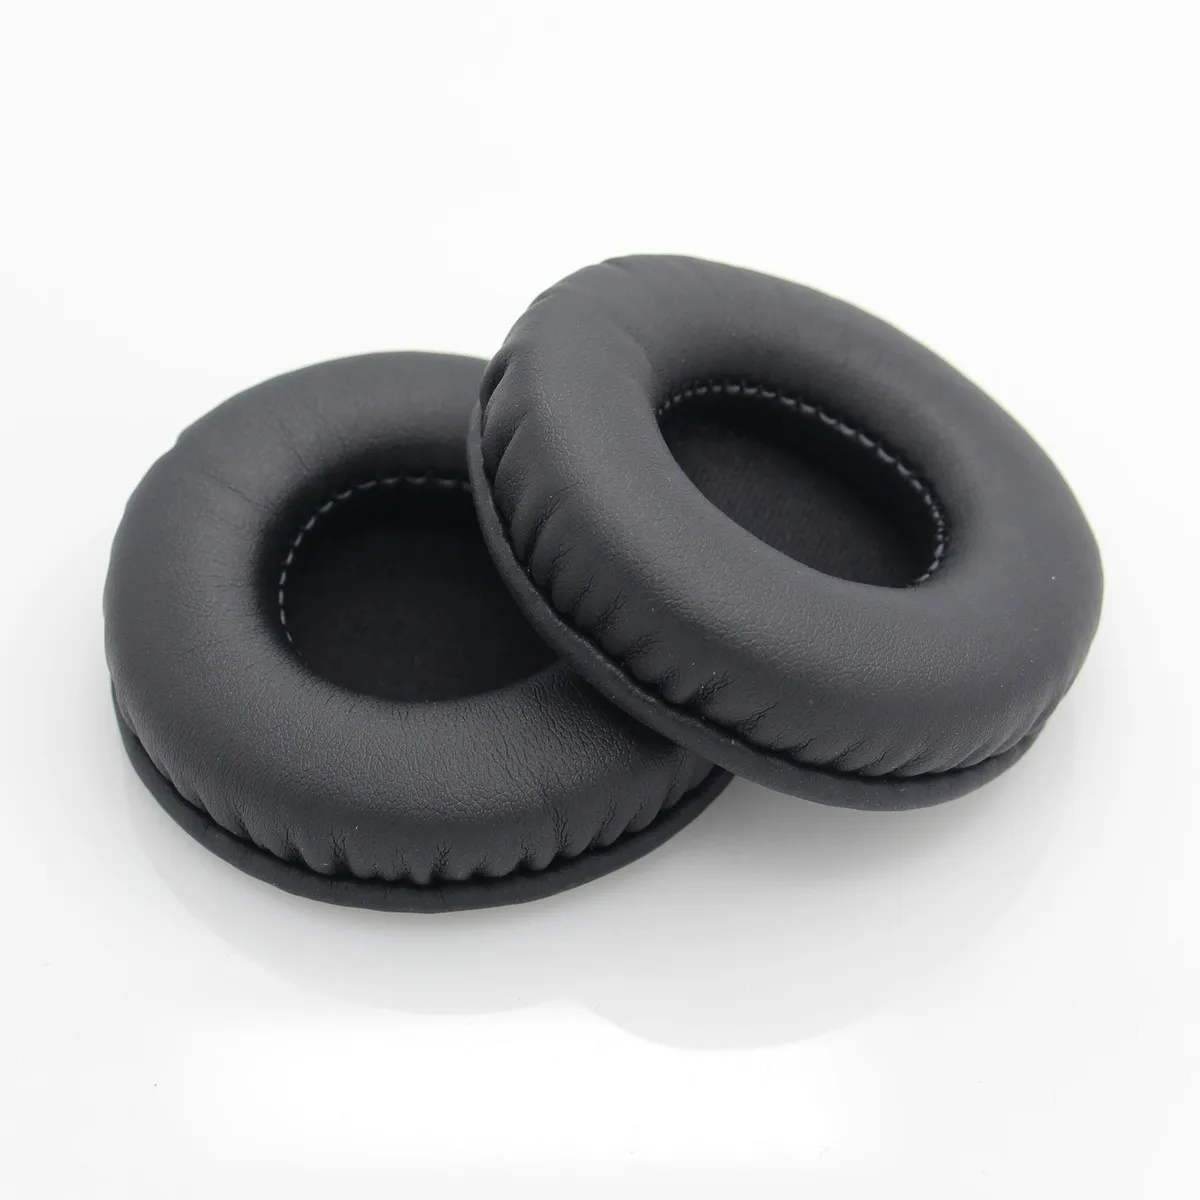 

High quality Replacement Leather Ear Cushions for Sennheiser HD25 PC150 PC151 PC155 Headset Earpads Earbud